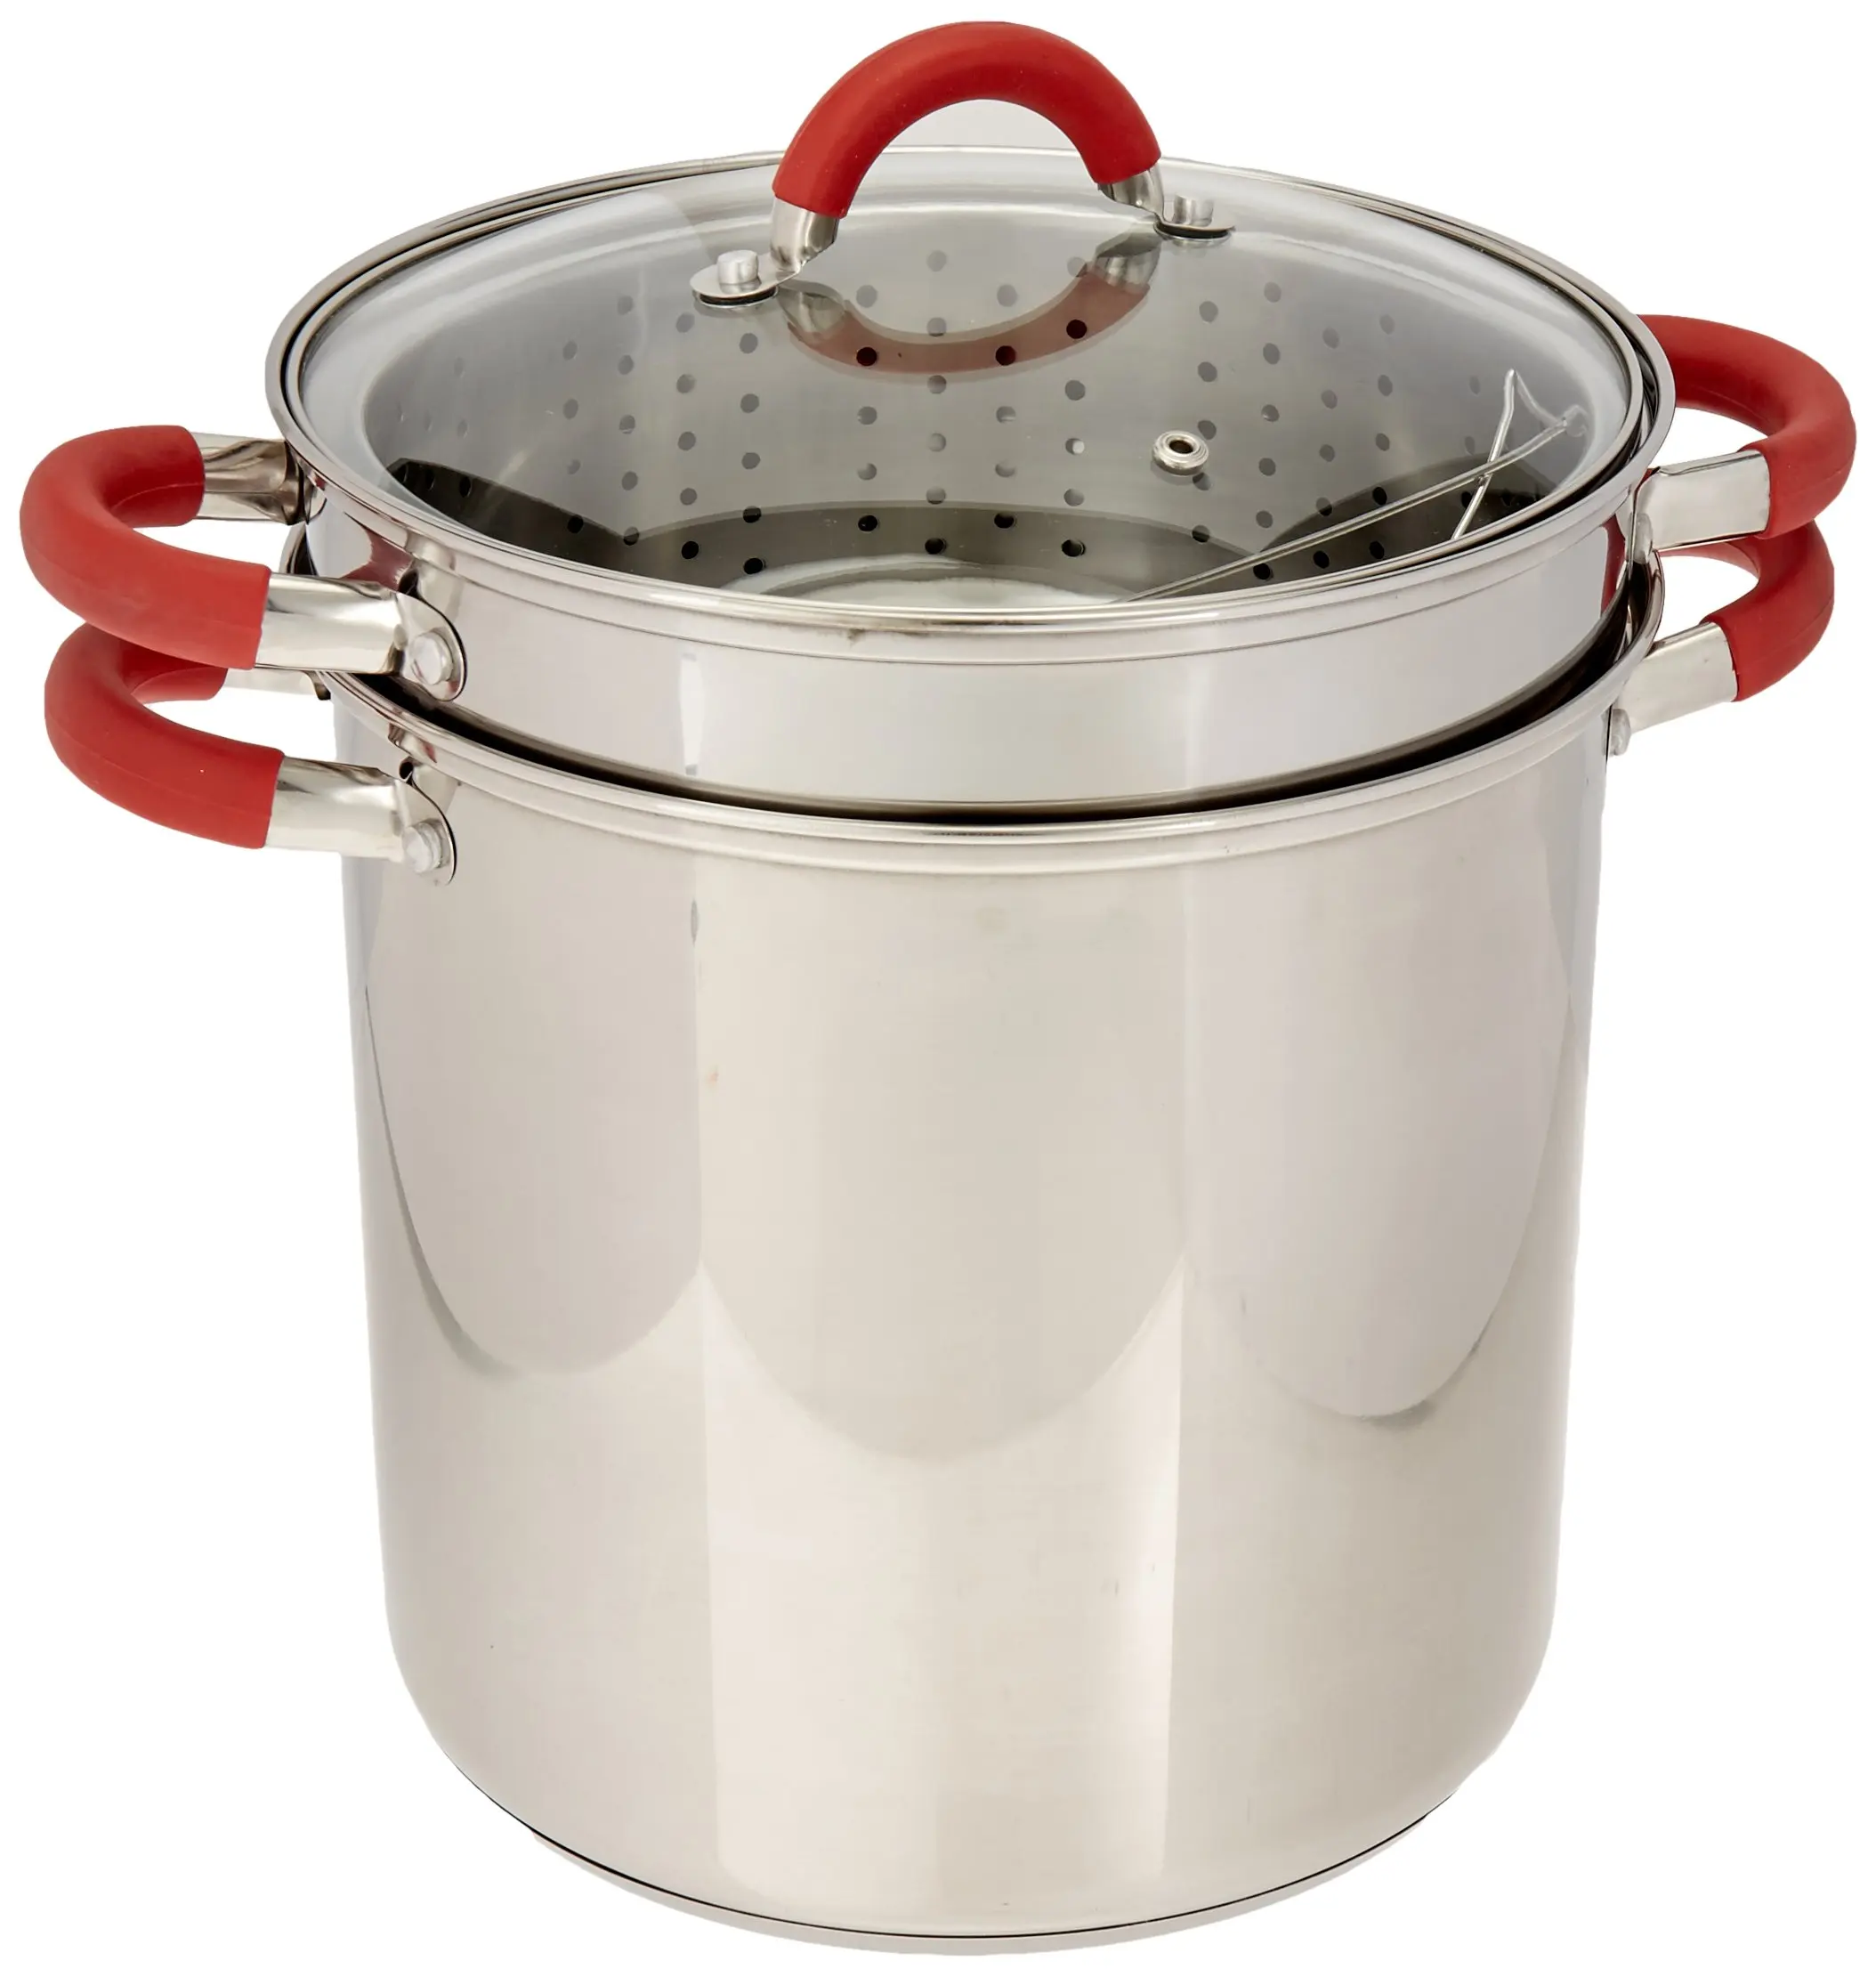 

12 Qt Multifunction Stainless Steel Pasta Cooker - Encapsulated Base, Vented Glass Lid, Riveted Silicone Covered Handles